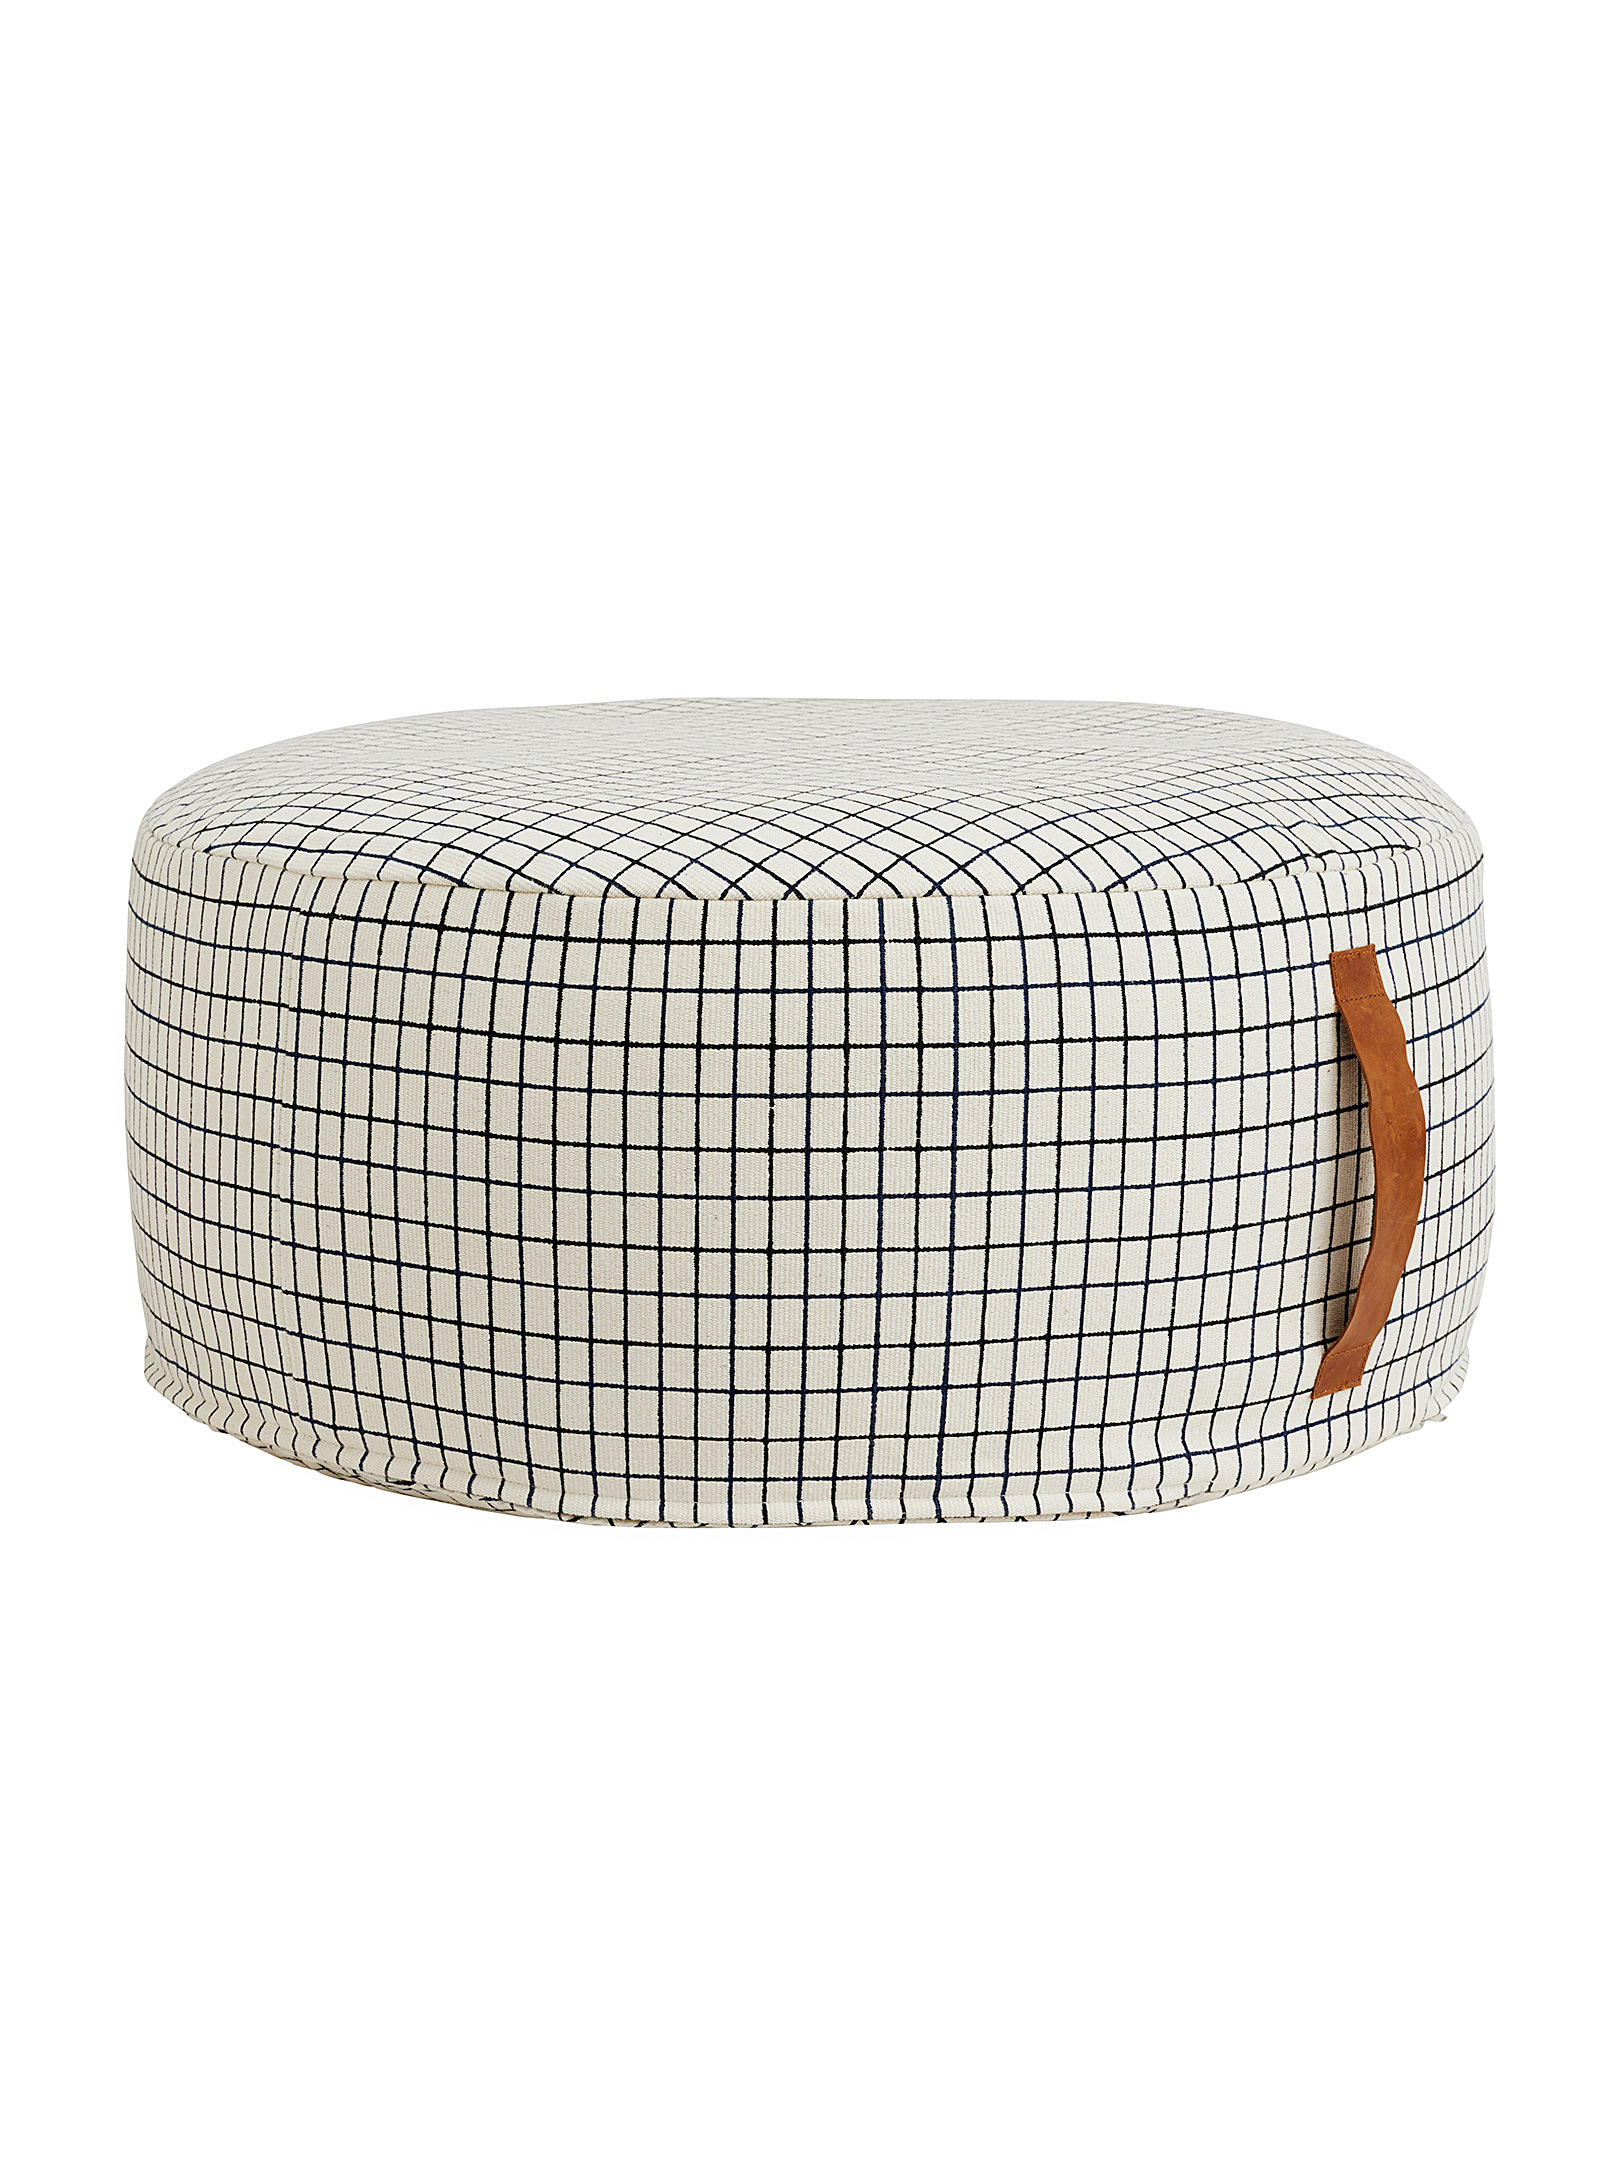 Oyoy Living Design Windowpane Pattern Round Pouf In Black And White